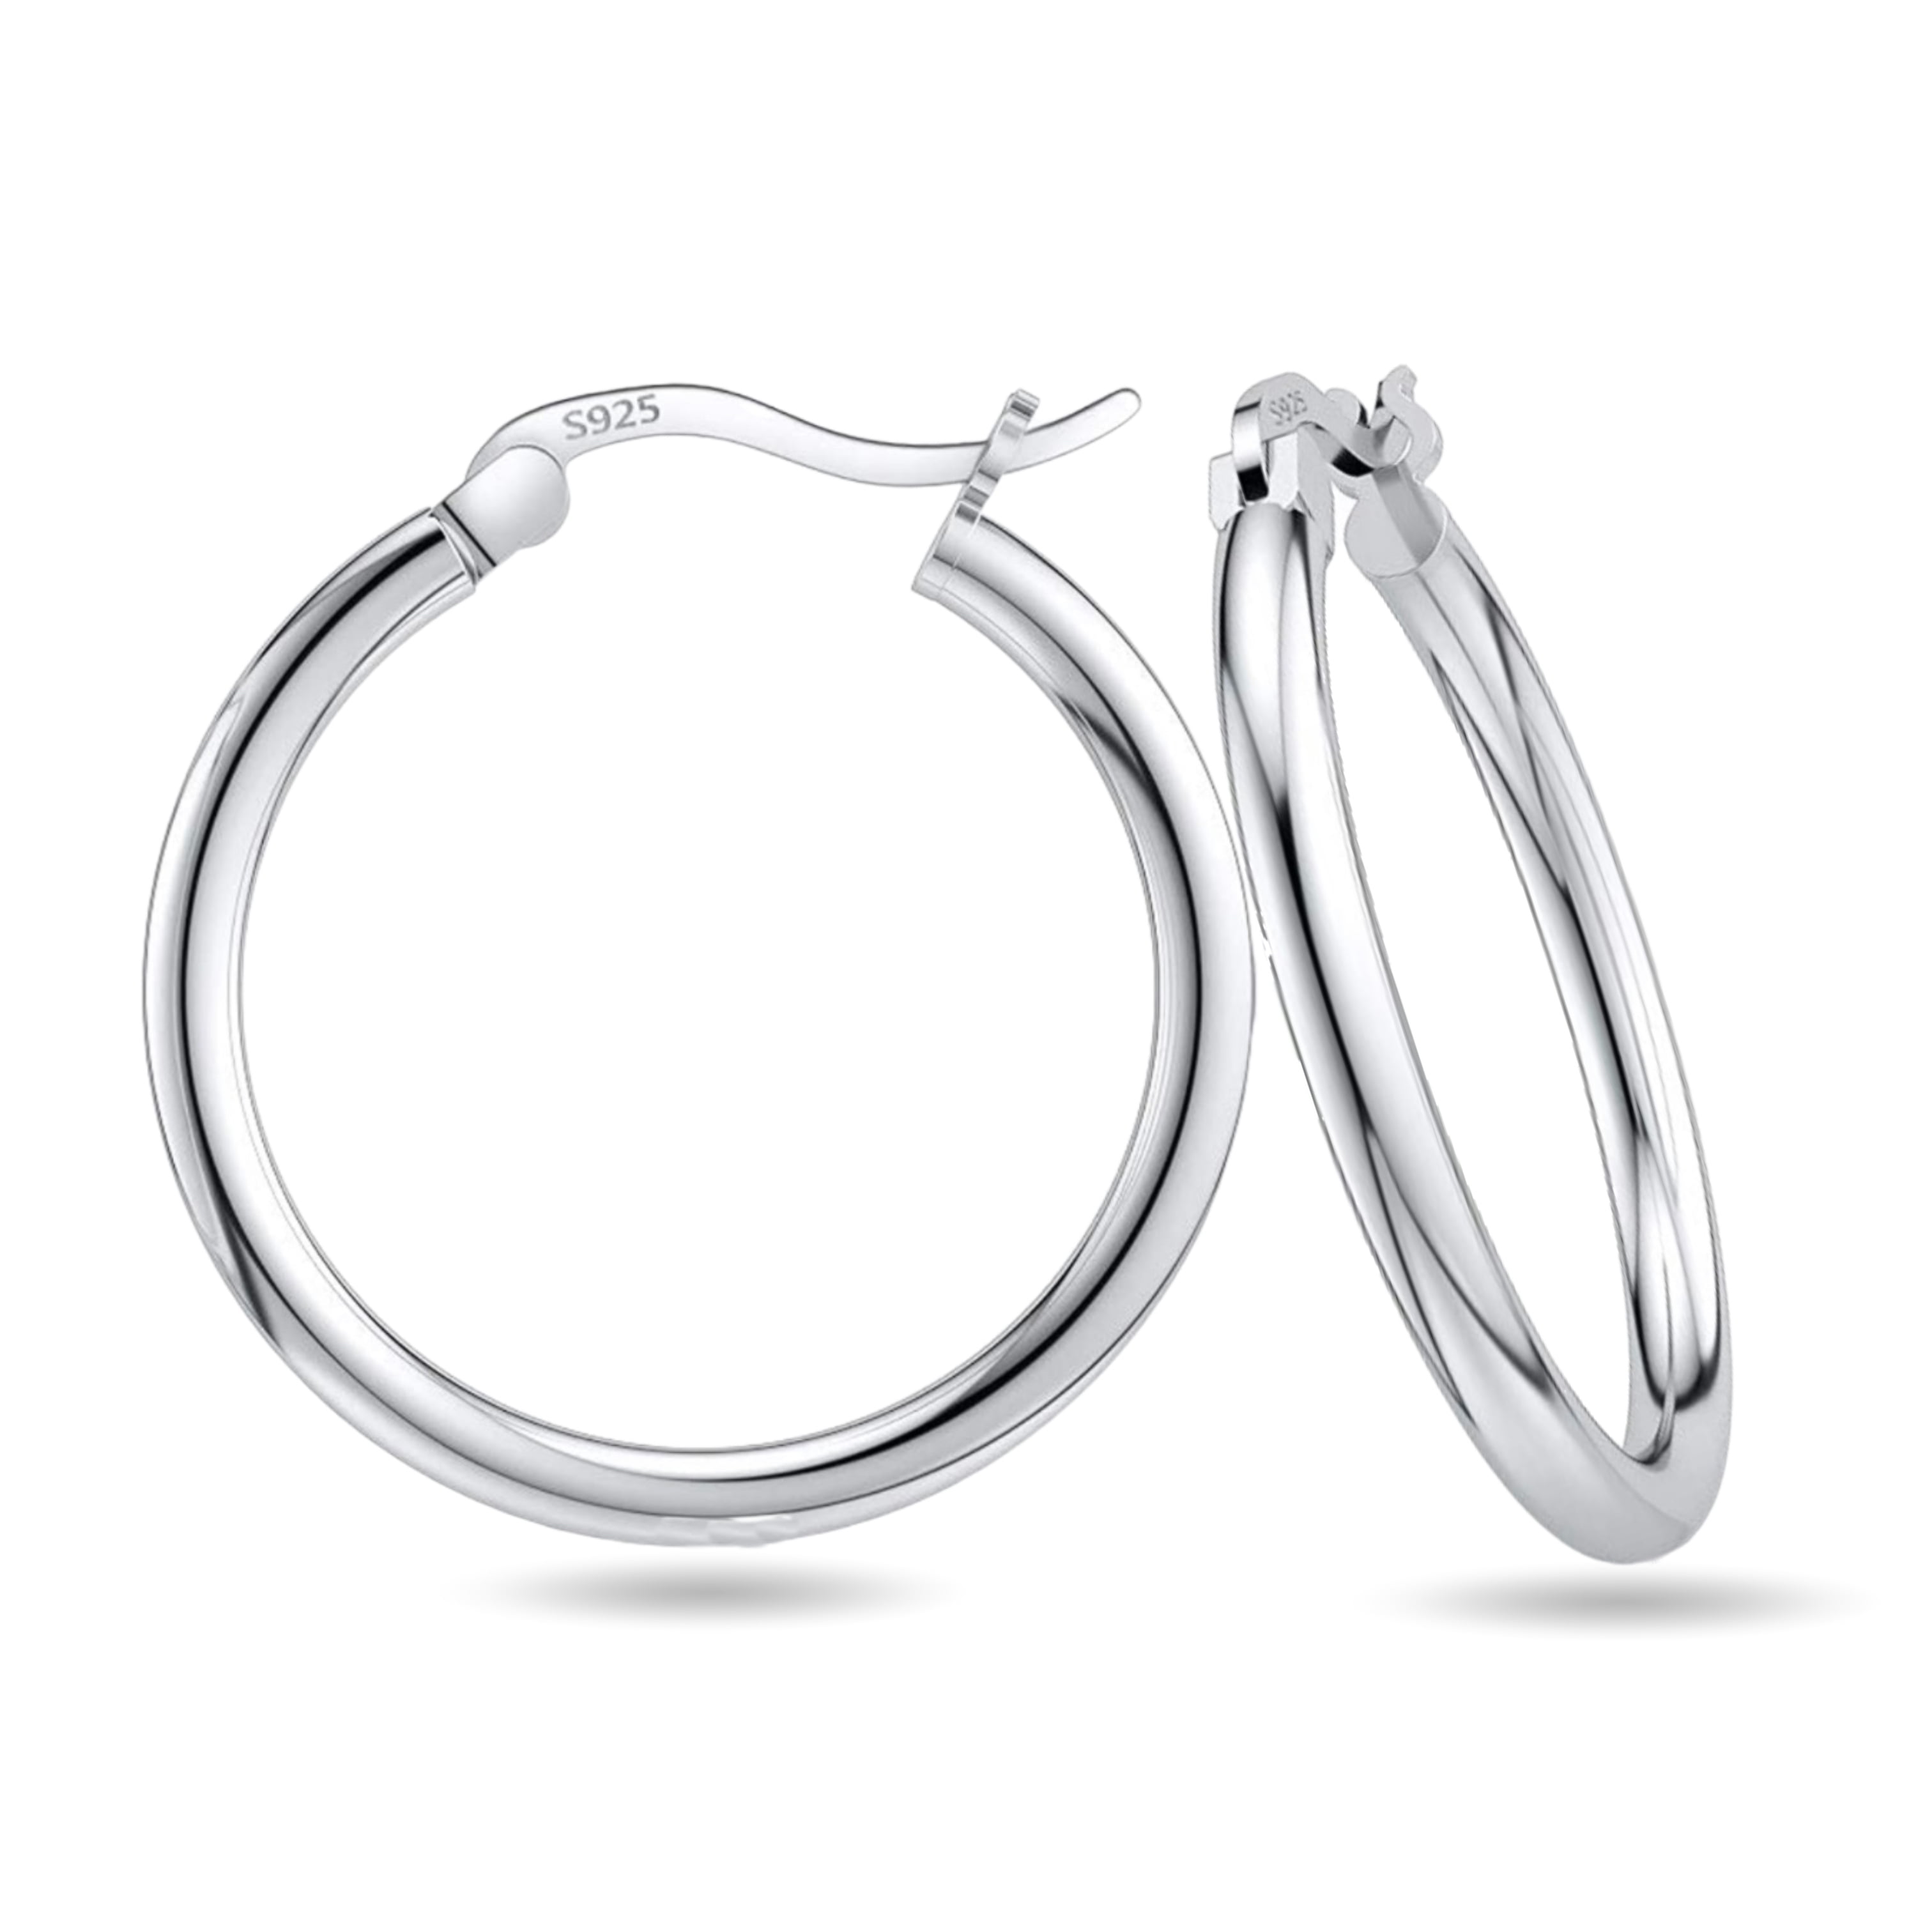 Donatello Gian 925 Sterling Silver Classic French Lock Hoop Earrings -  Silver 25mm - 17 requests | Flip App